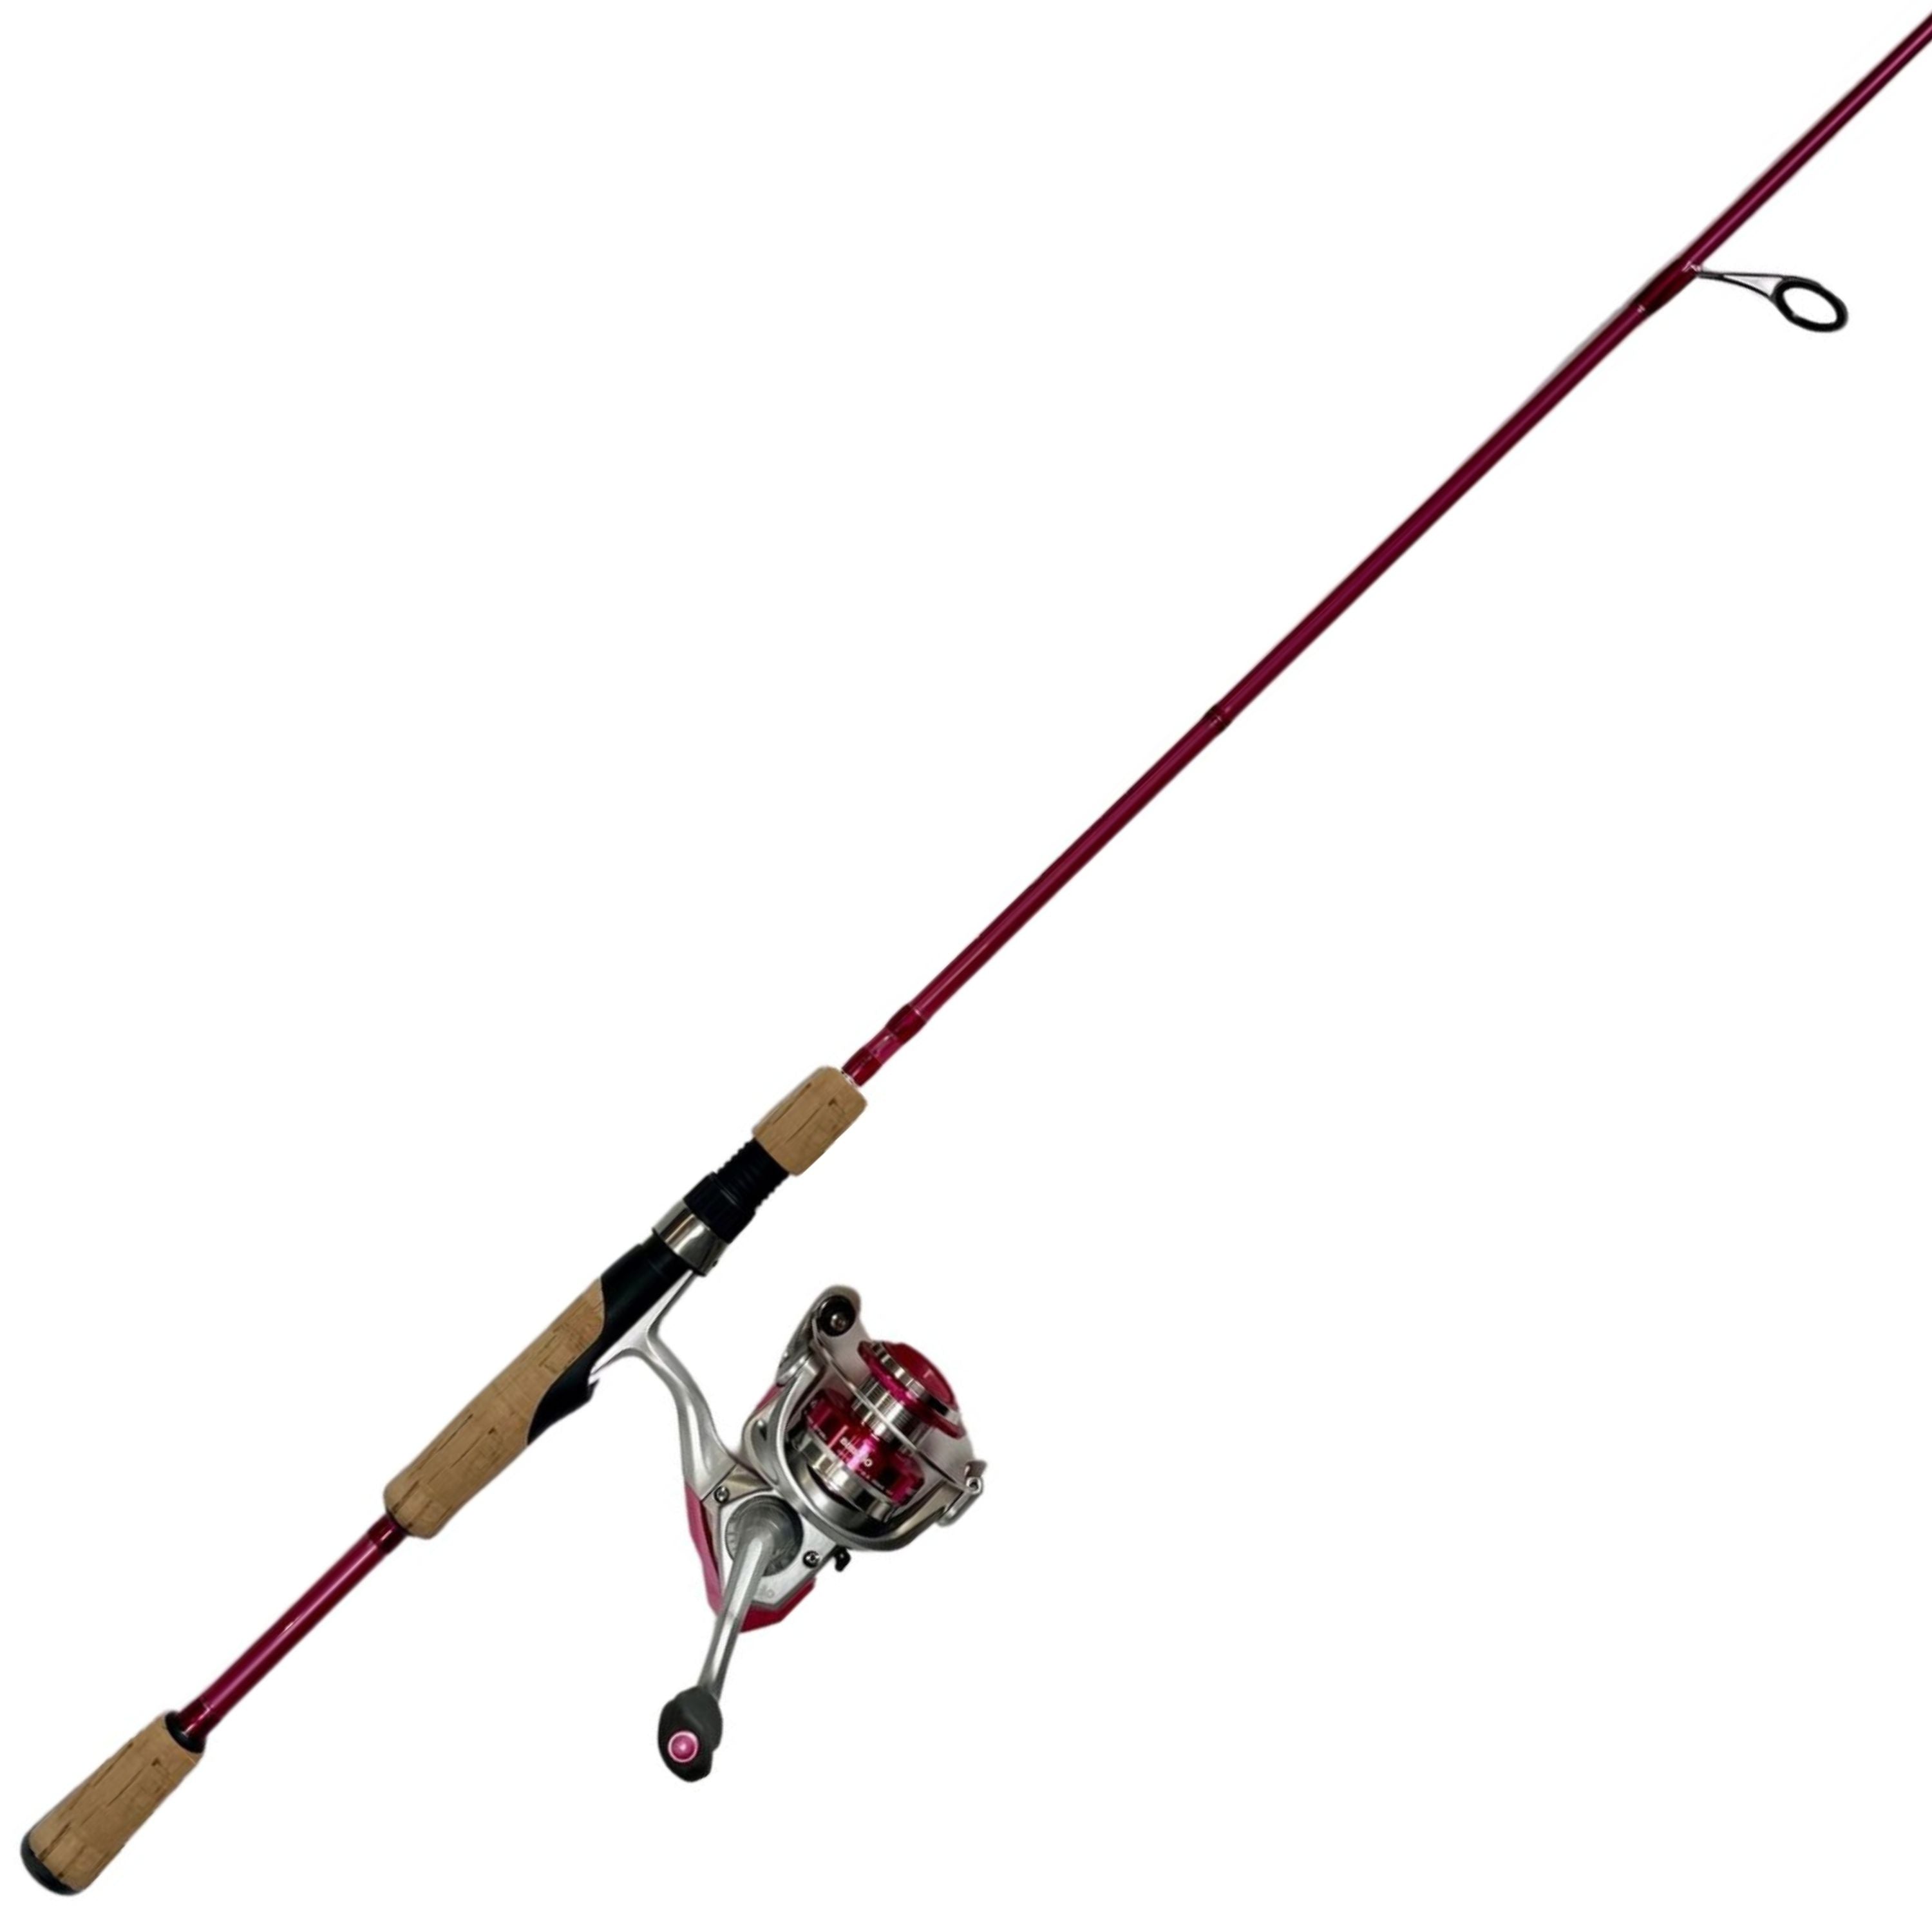 "Outback Ladies" Spinning combo